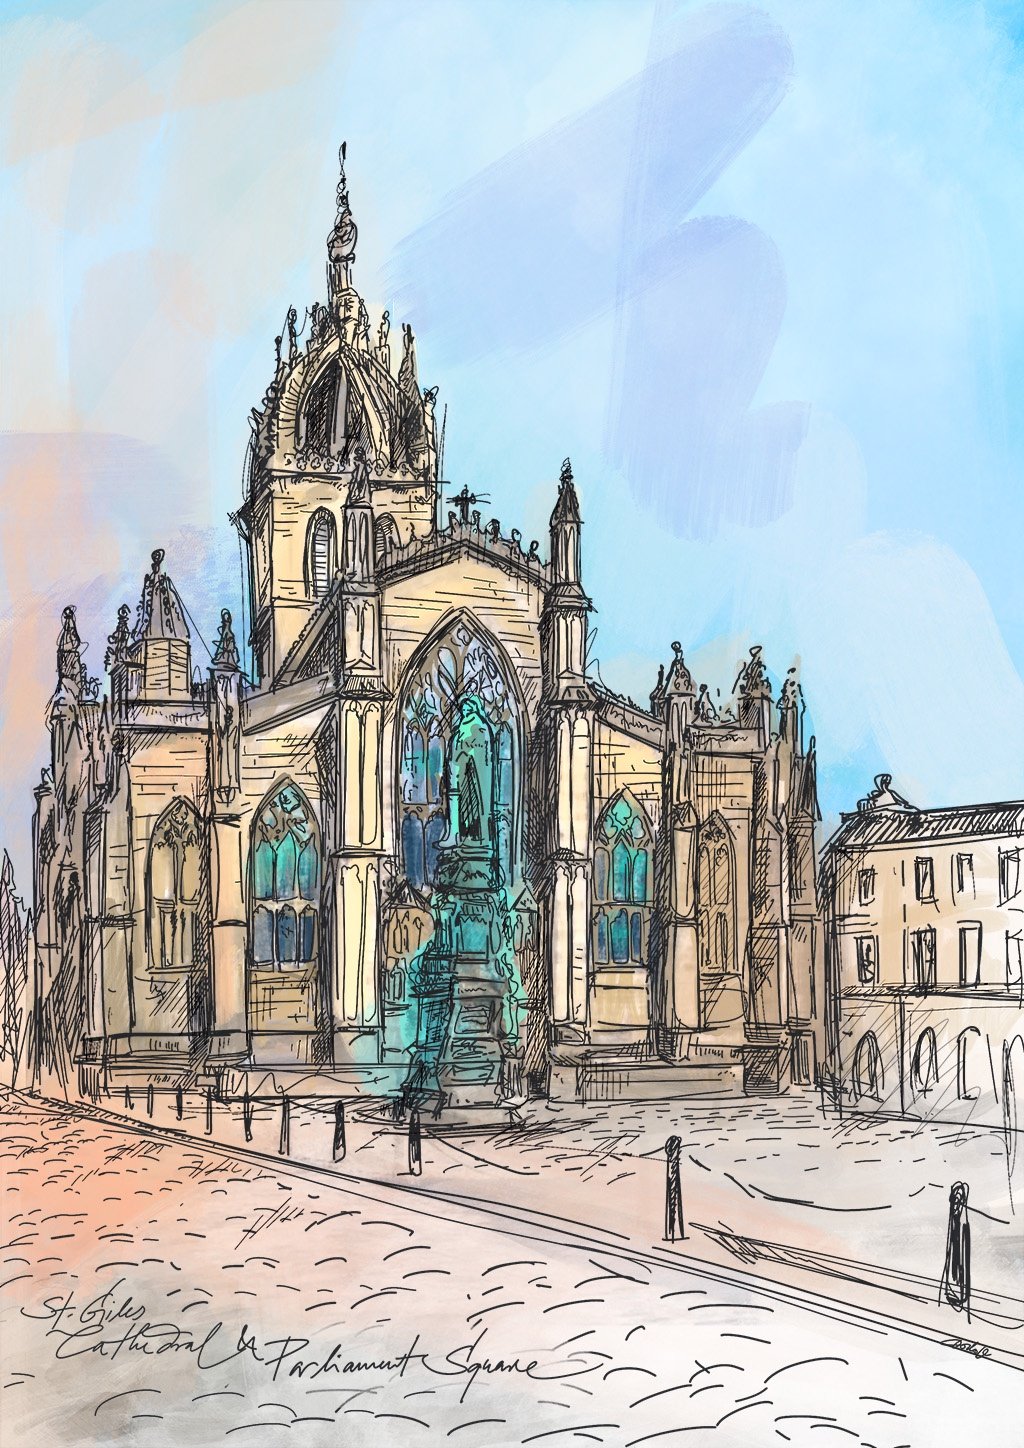 St Giles Cathedral & Parliament Square A4 Print